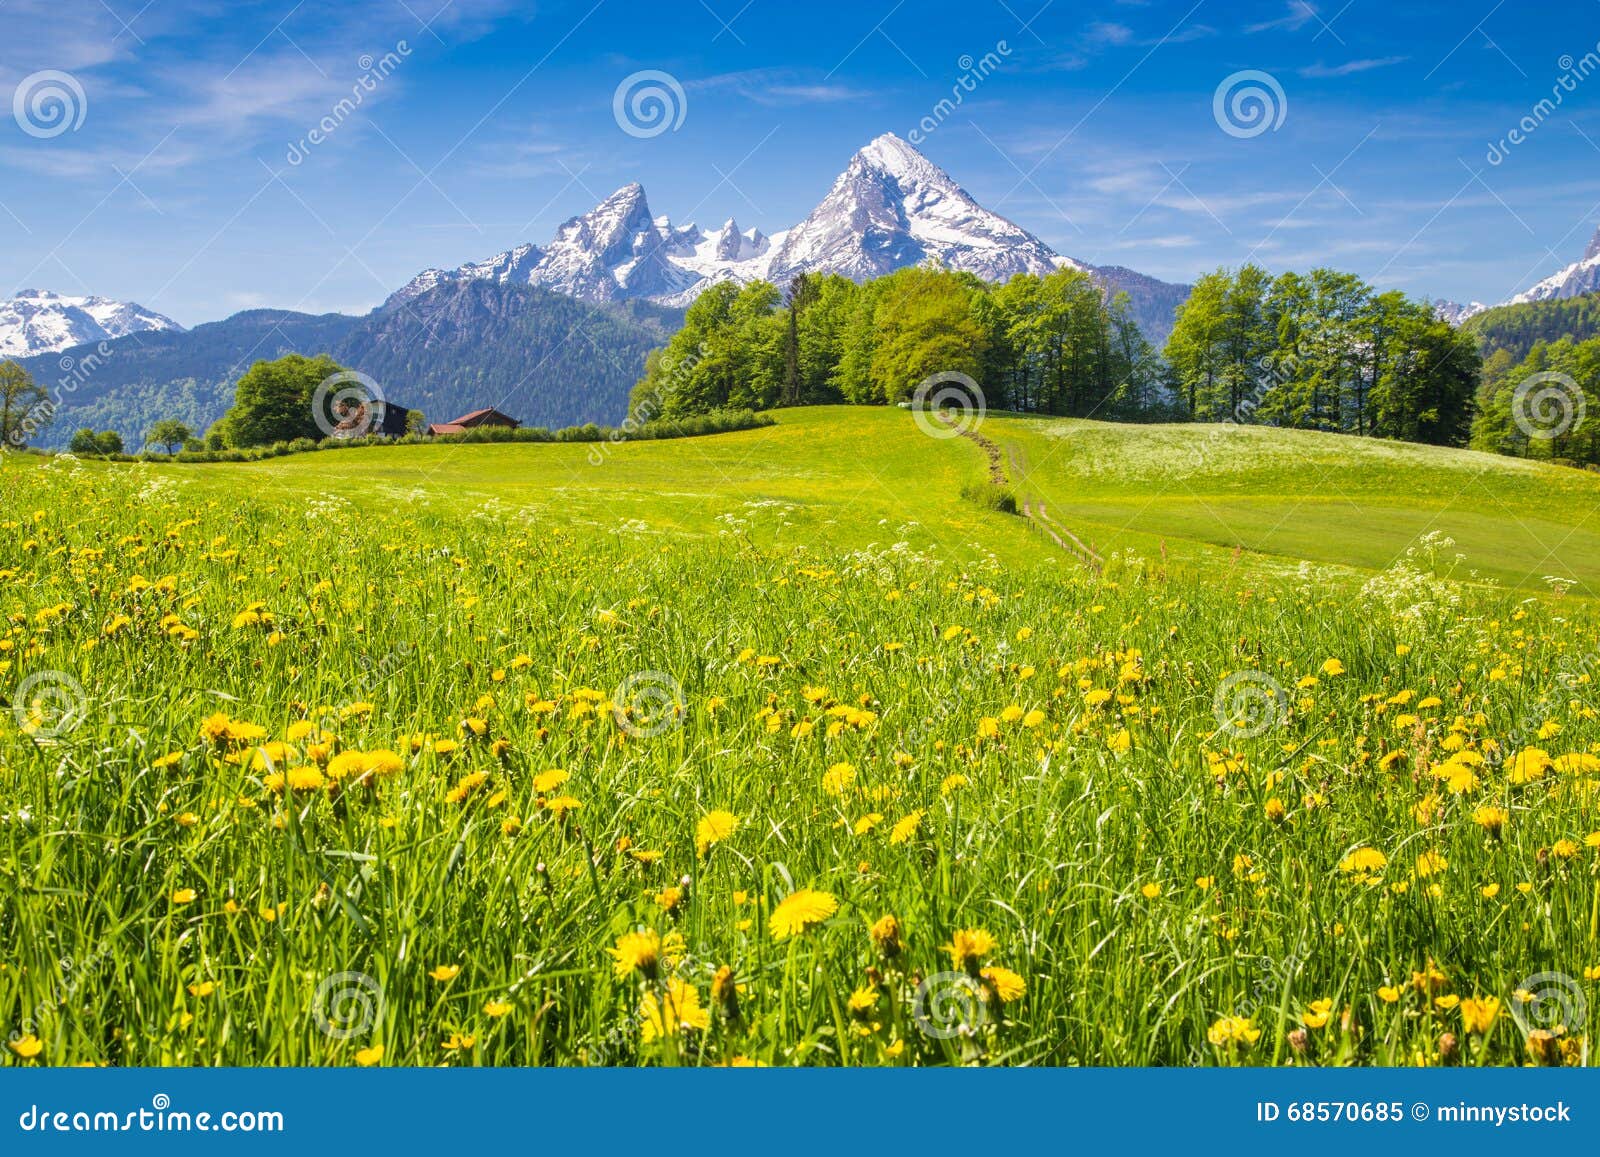 idyllic landscape in the alps with green meadows and flowers